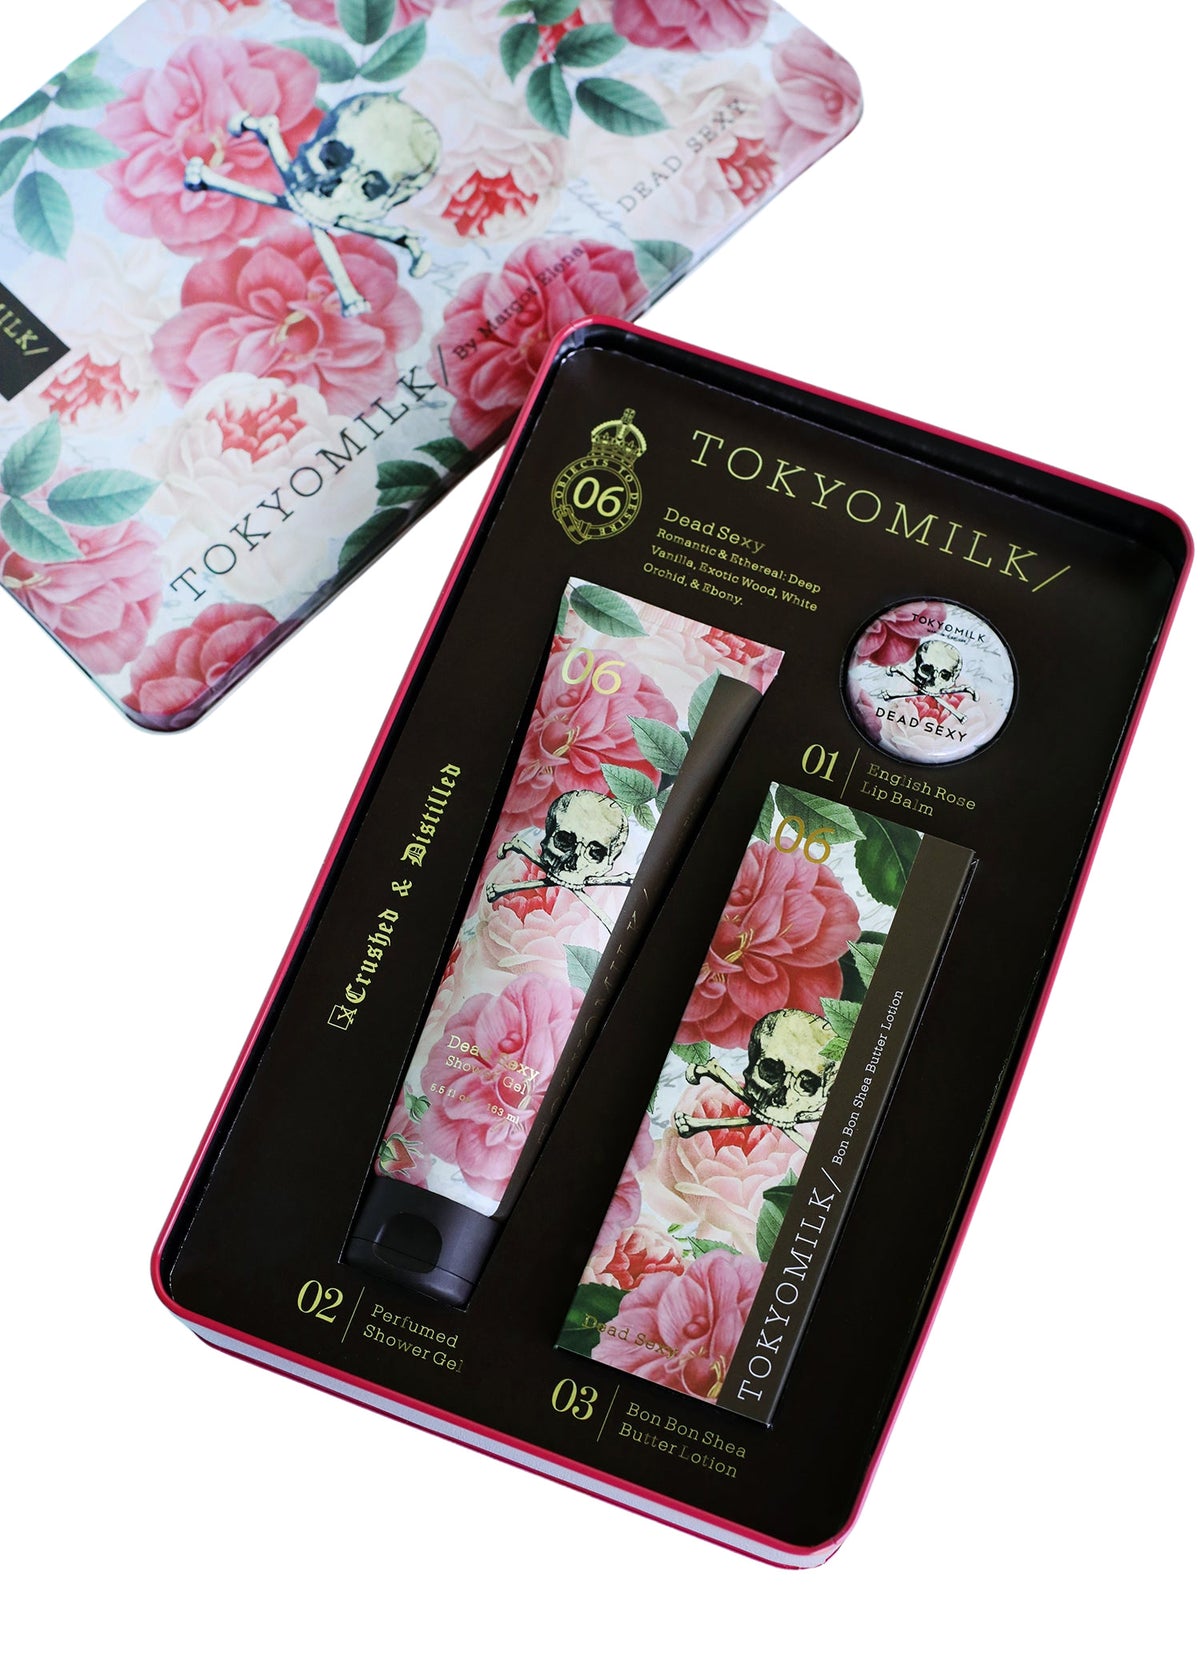 A Margot Elena TokyoMilk Dead Sexy Gift Set Tin displayed in an open tin box, featuring a floral and skull print design. The set includes a shea butter handcreme, lip balm, and e